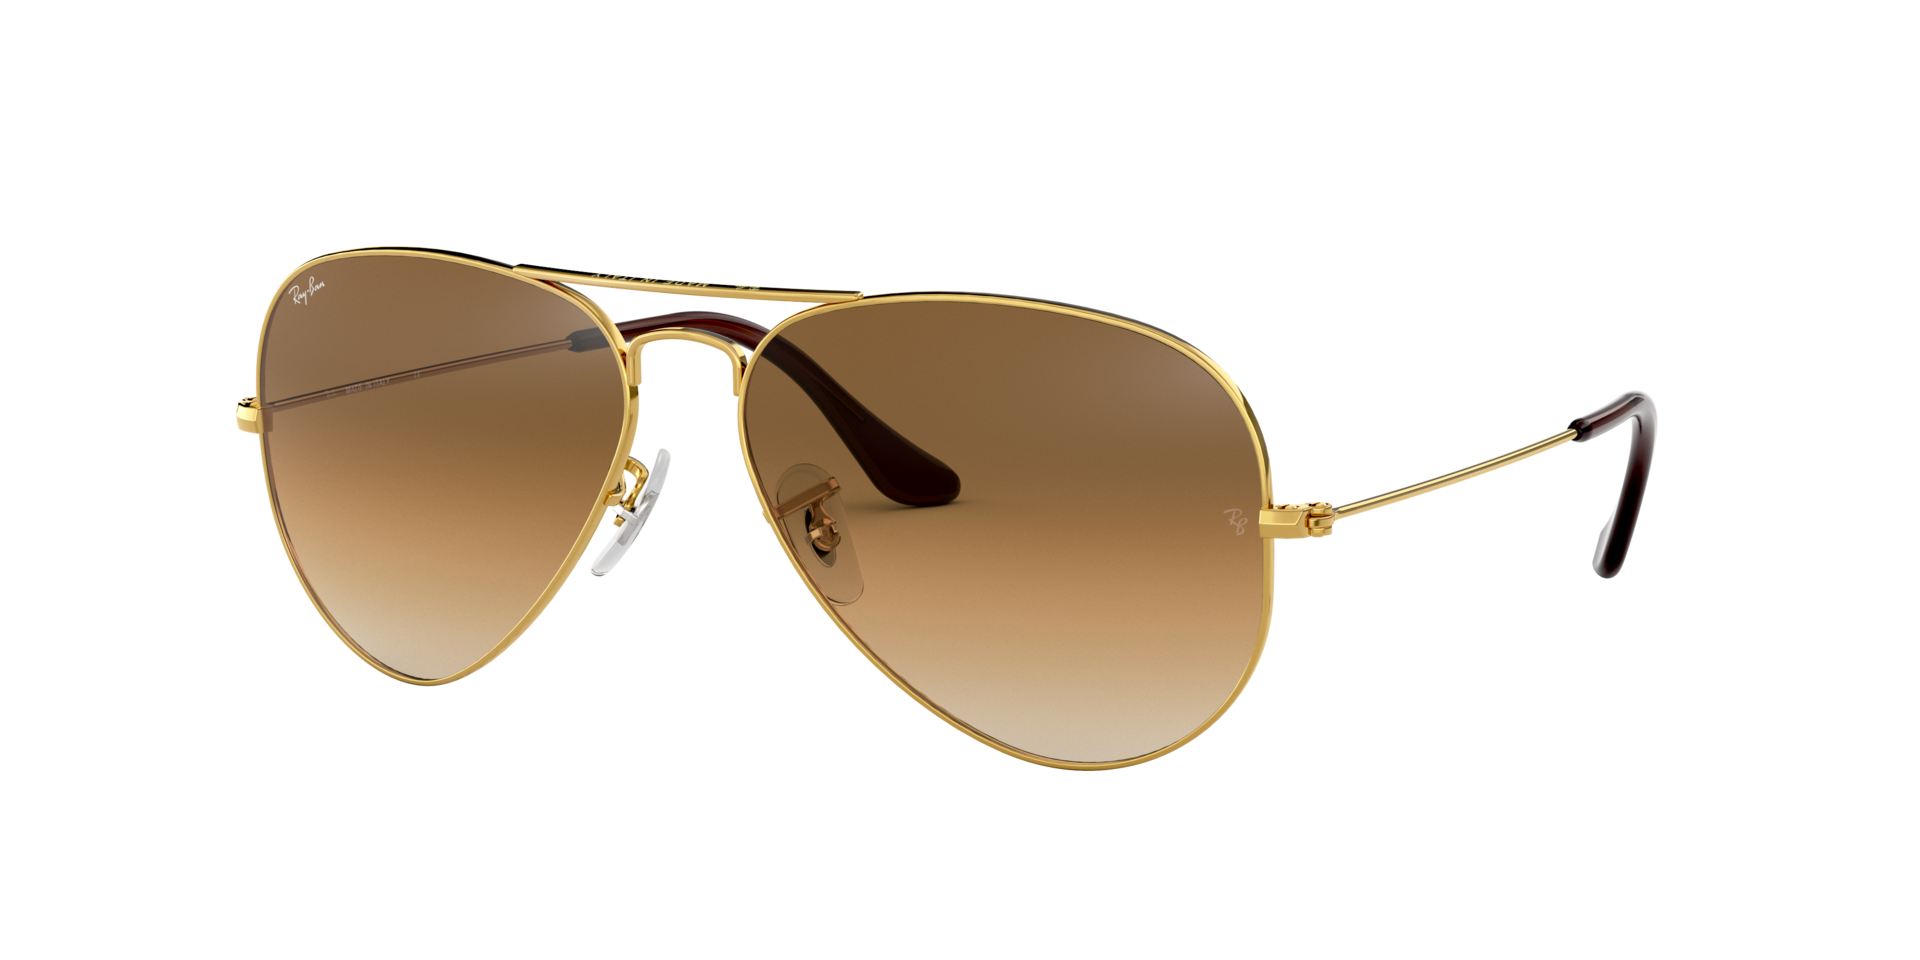 Ray-Ban Aviator Large Metal Sonnenbrille RB3025 001/51 55